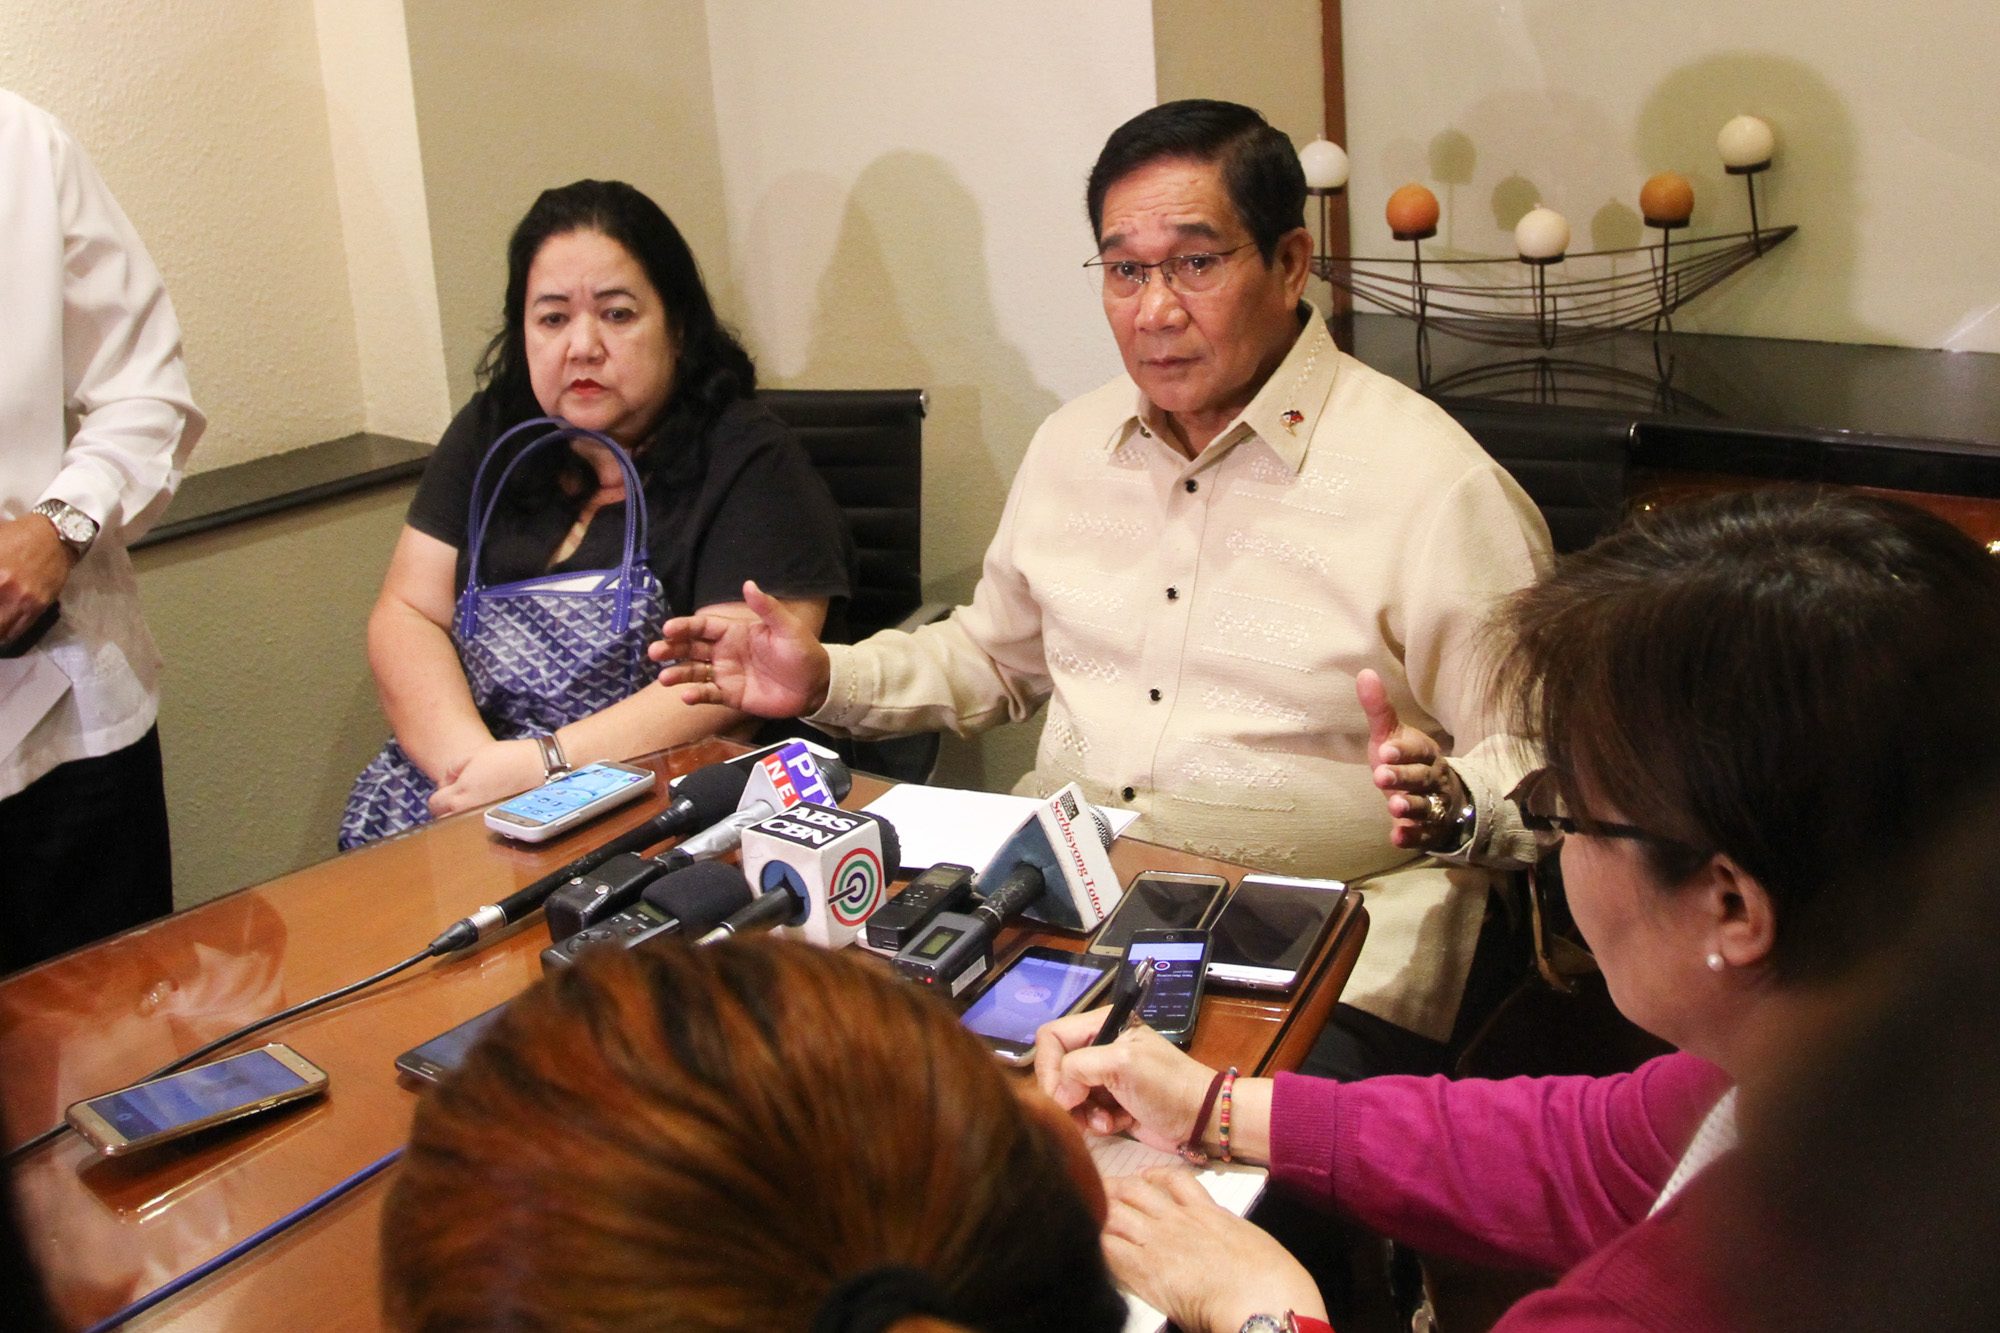 TALKS WITH RUSSIA. National Security Adviser Hermogenes Esperon holds a press conference at the Marco Polo Hotel in Davao City on February 17, 2017. Photo by Manman Dejeto/Rappler 